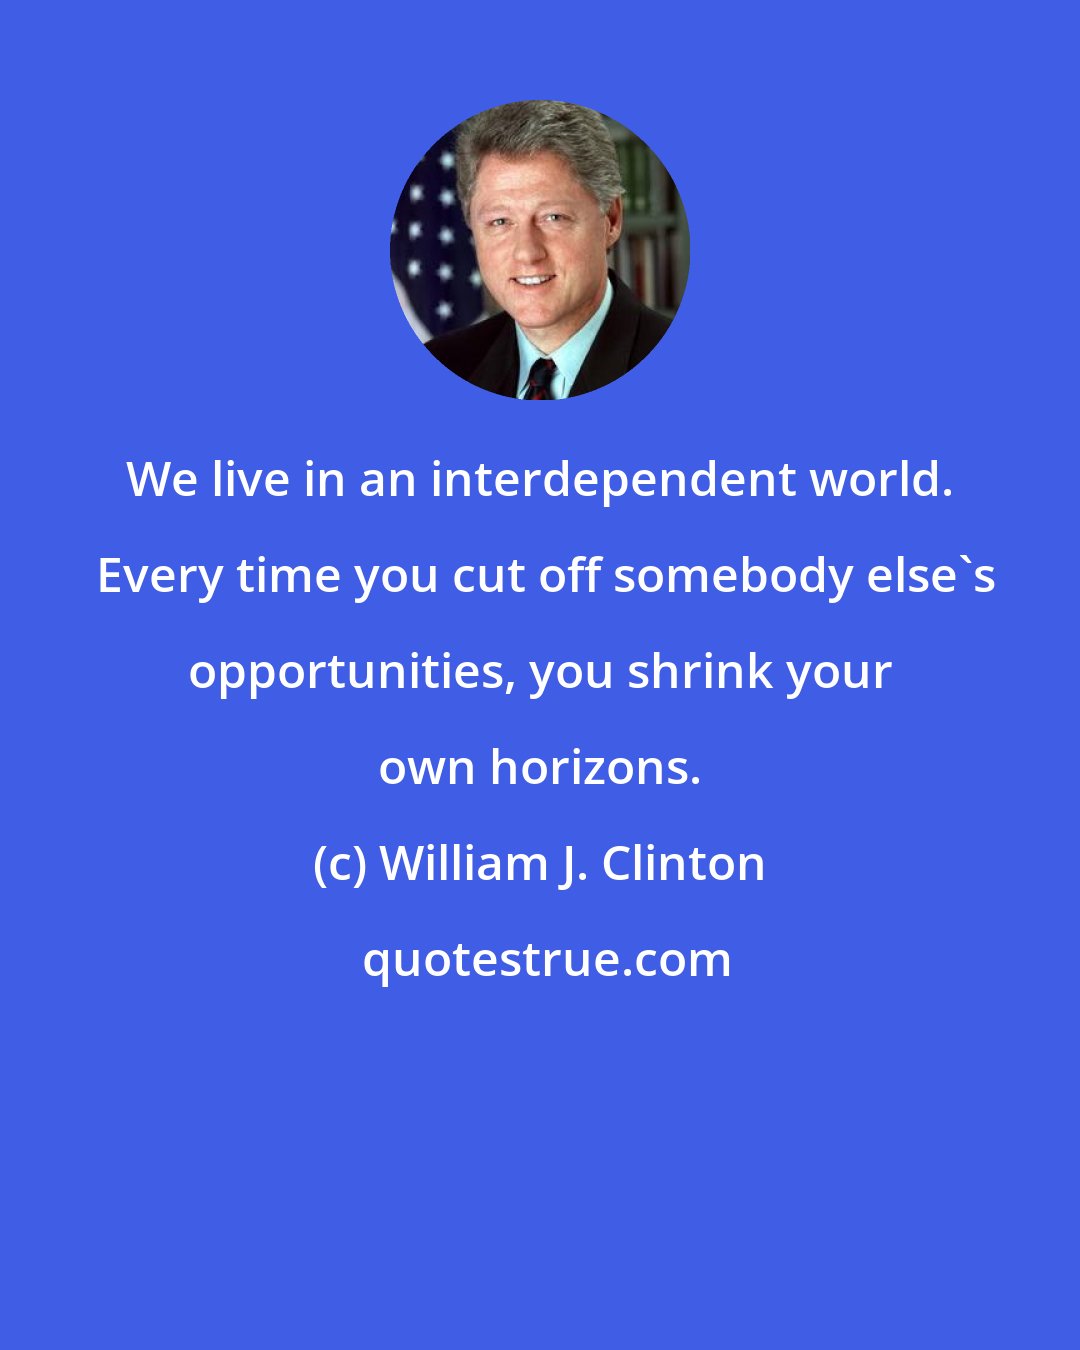 William J. Clinton: We live in an interdependent world.  Every time you cut off somebody else's opportunities, you shrink your own horizons.